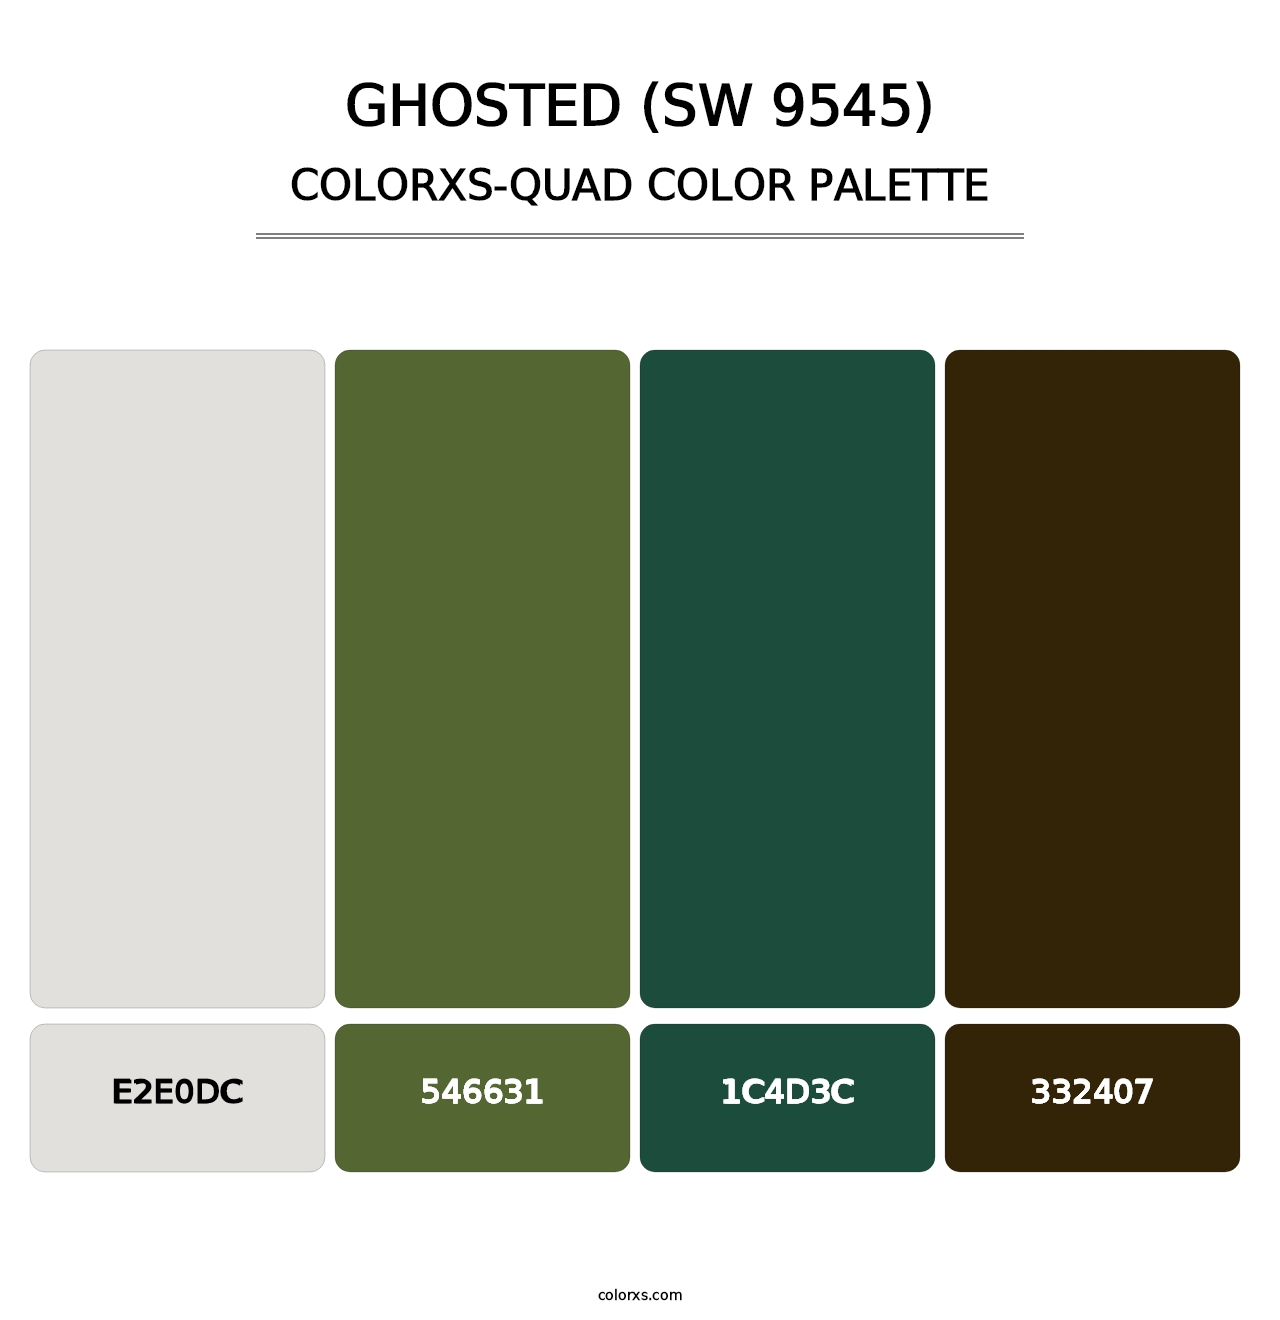 Ghosted (SW 9545) - Colorxs Quad Palette